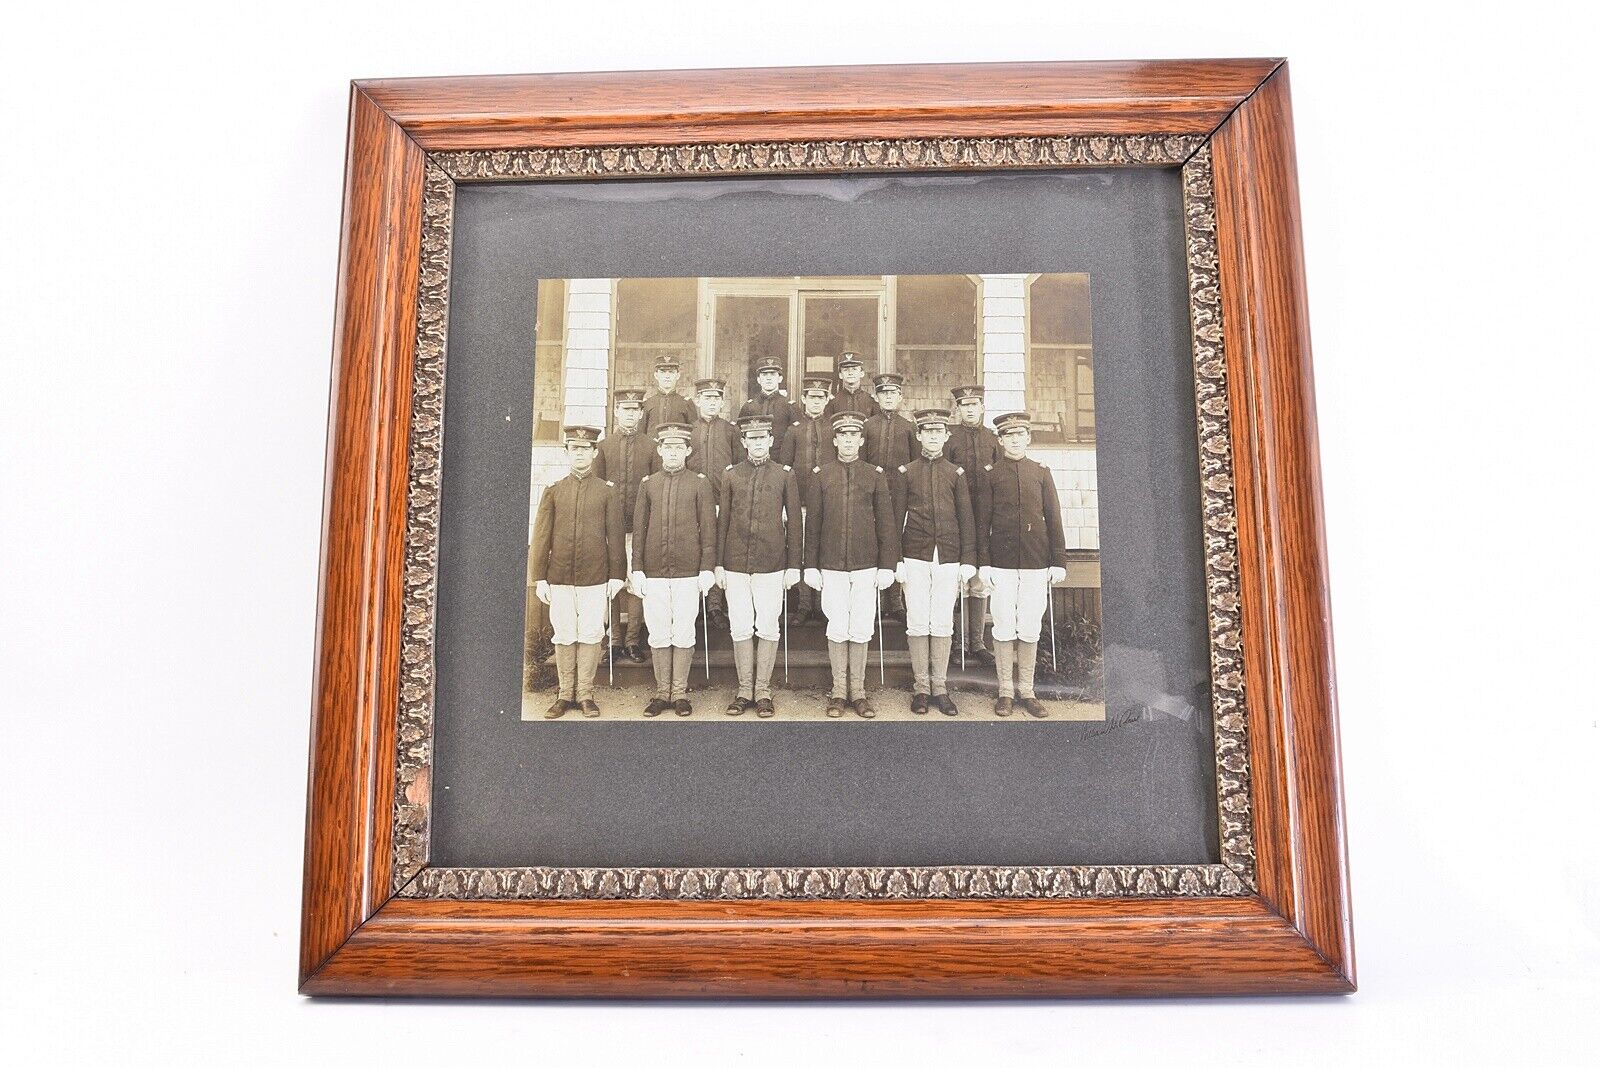 Antique Framed Photo of a Military Institute Class by William H. Rau